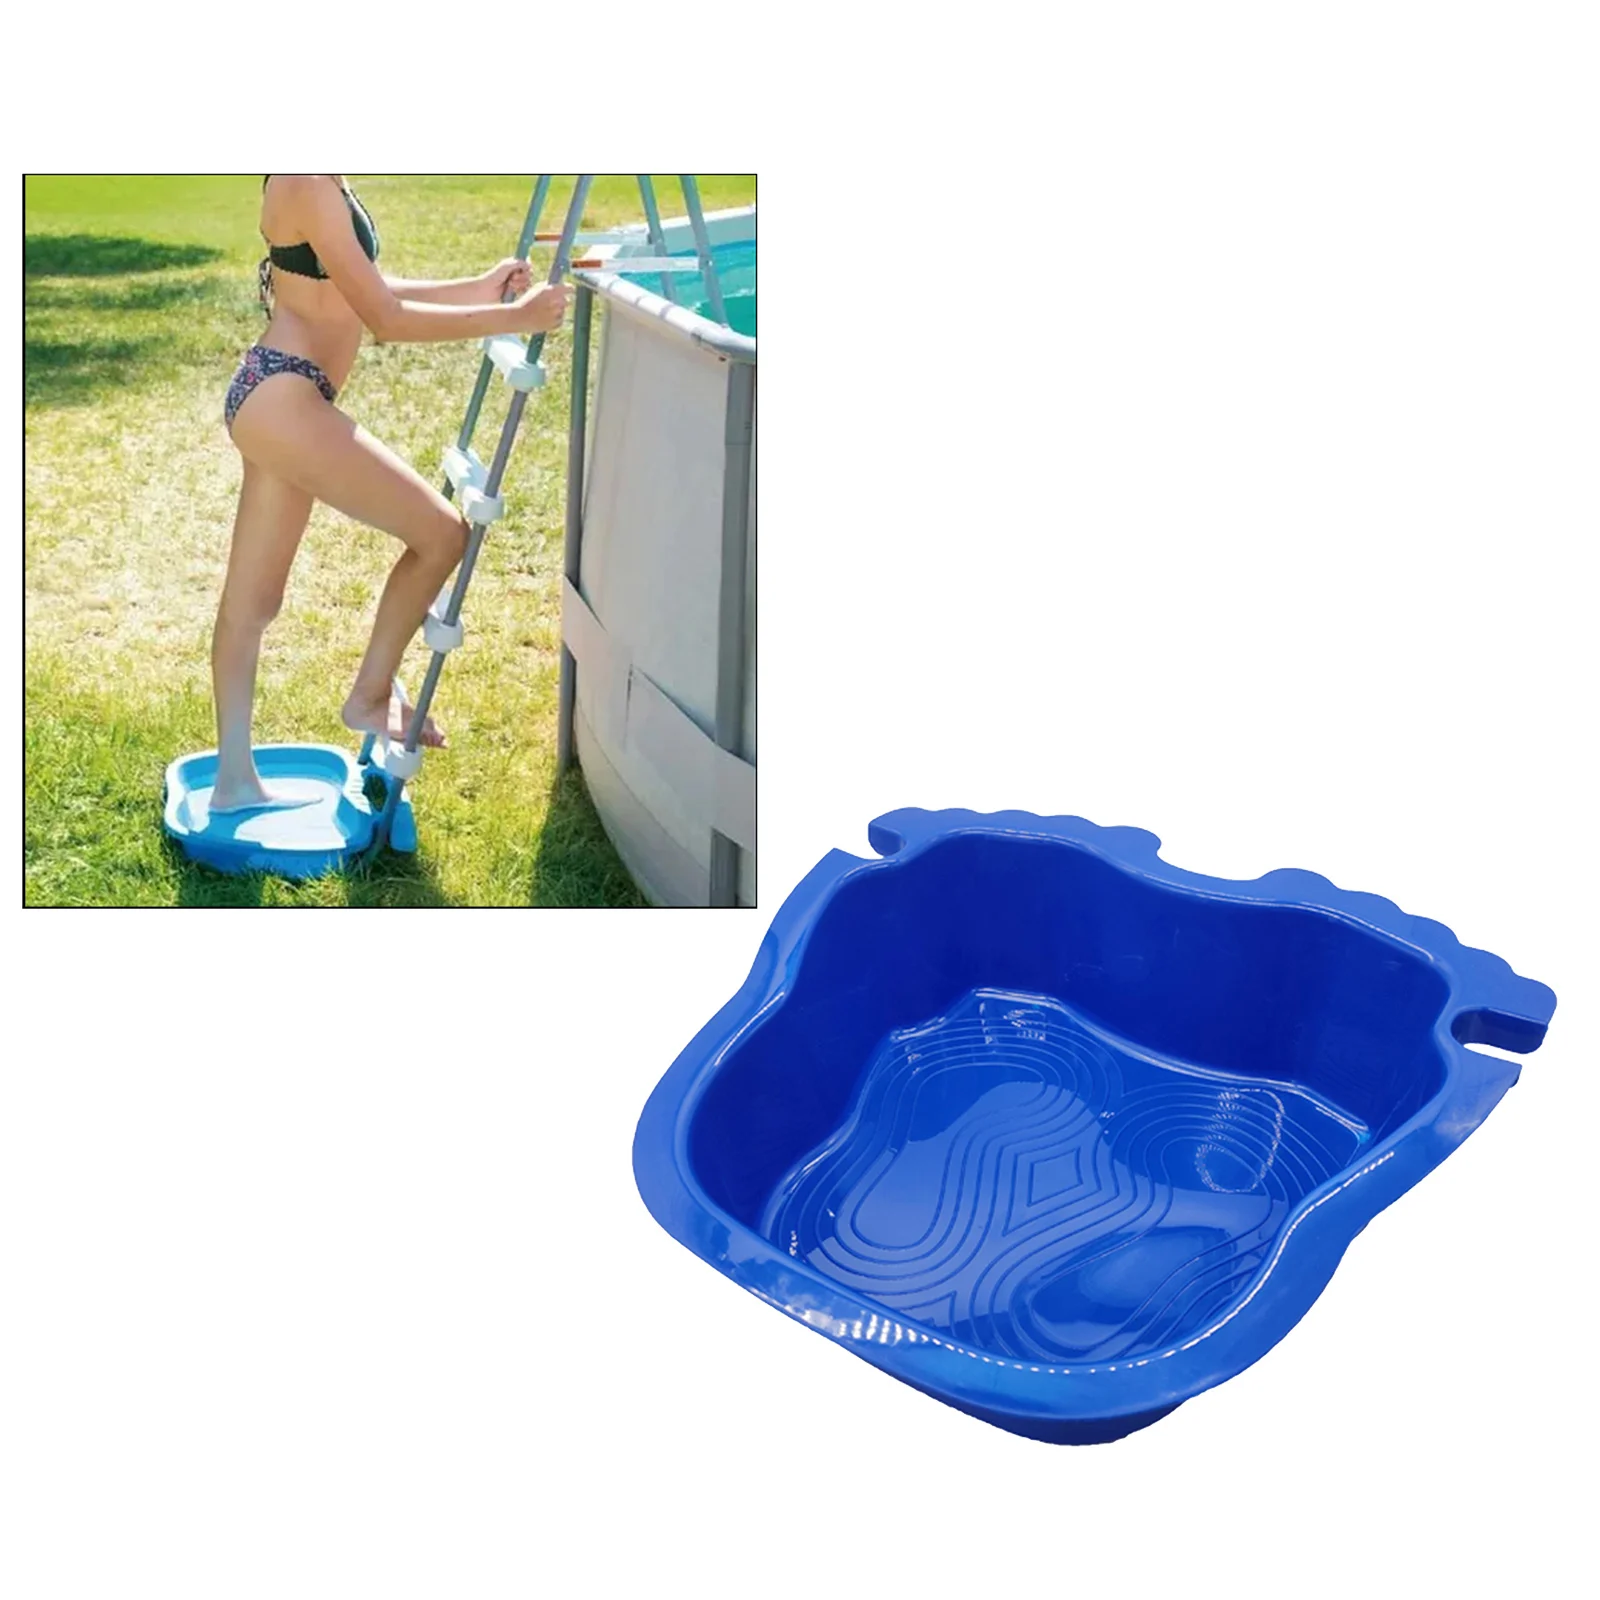 Pool Foot Bath Tray Swimming Pool Spa Pool Foot Bath Tray Foot Soaking Bath Basin for In Ground and Above Ground Pools and Spas